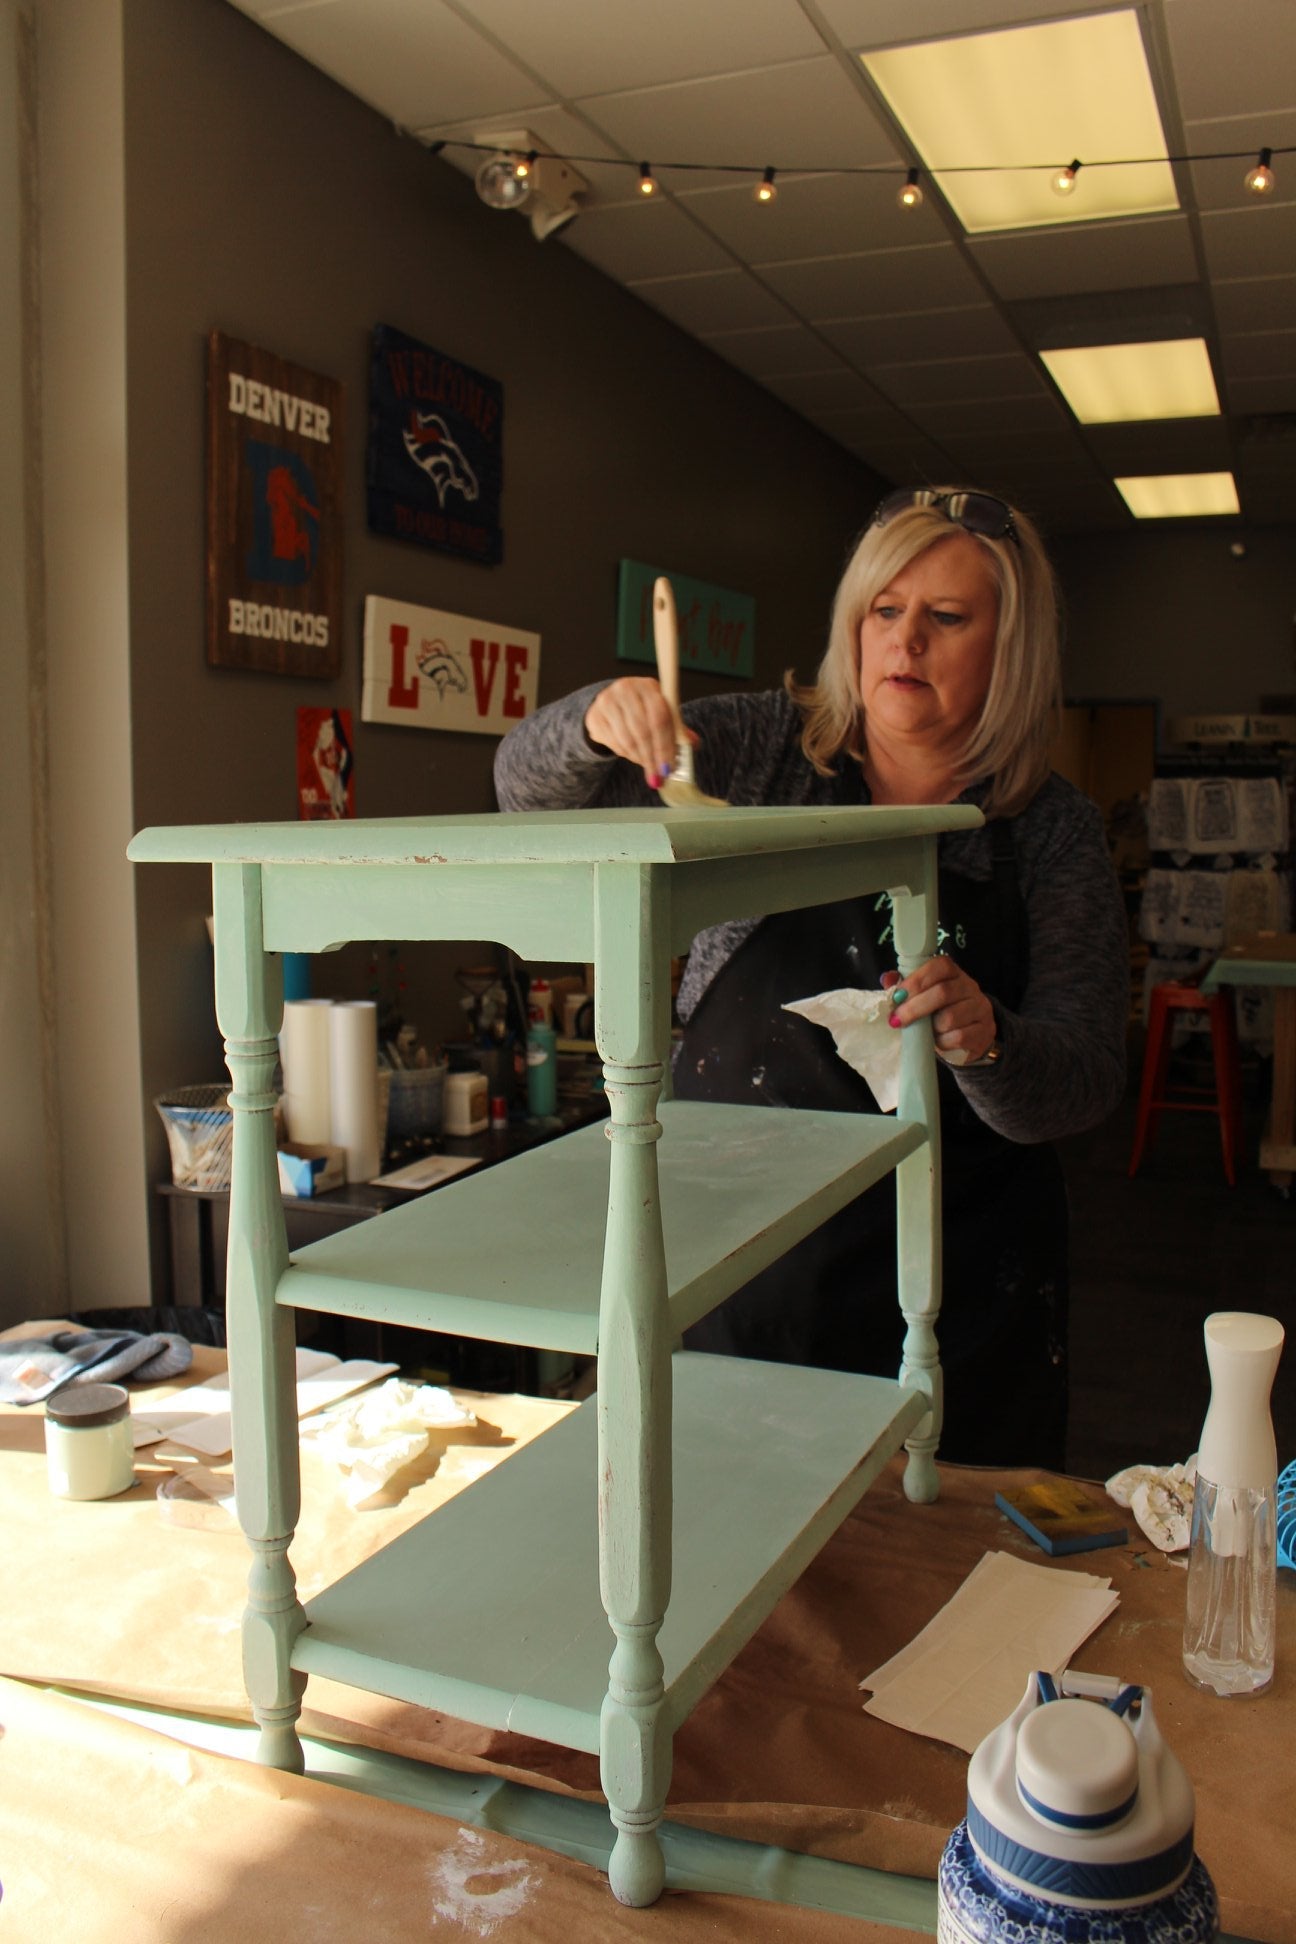 Furniture Painting 101 - Wednesday 7/26 @ 6pm